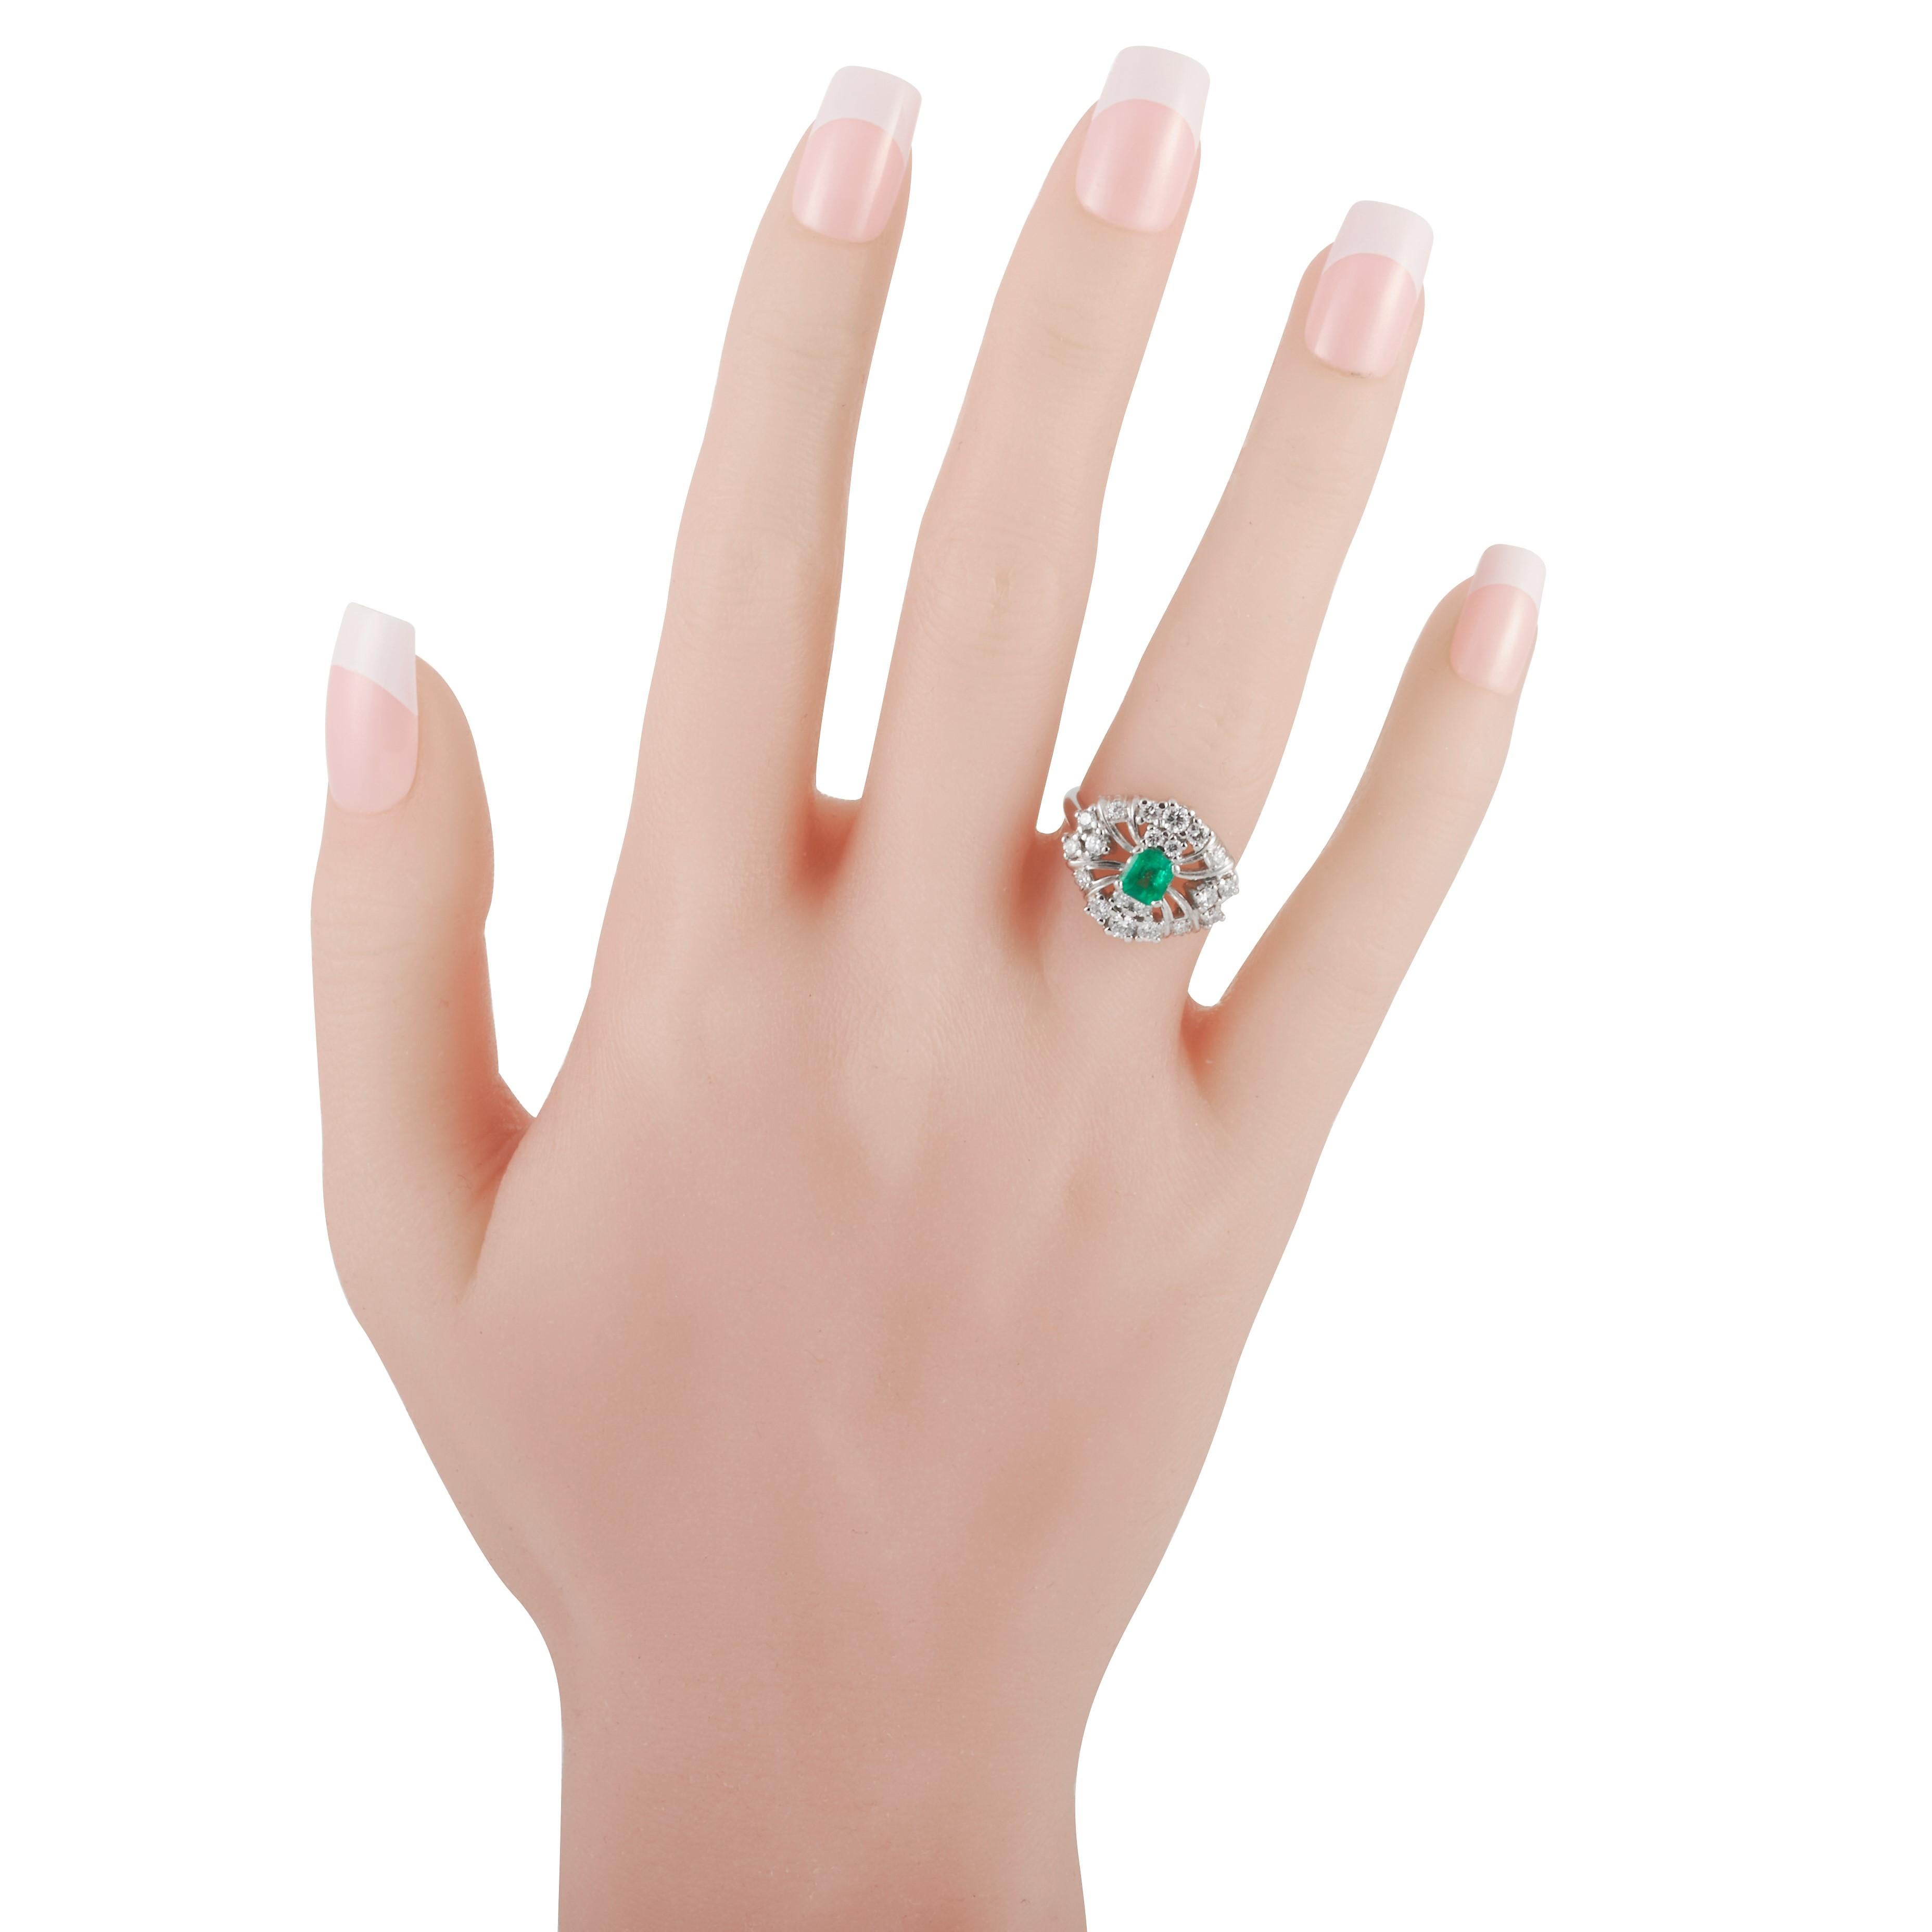 Bailey Banks & Biddle emerald and diamond ring in platinum.

The centerpiece of this ring is a 0.50 carat emerald cut emerald, it is surrounded by 20 round brilliant cut diamonds weighing approximately 1.05 carats with G-H color and VS clarity. 